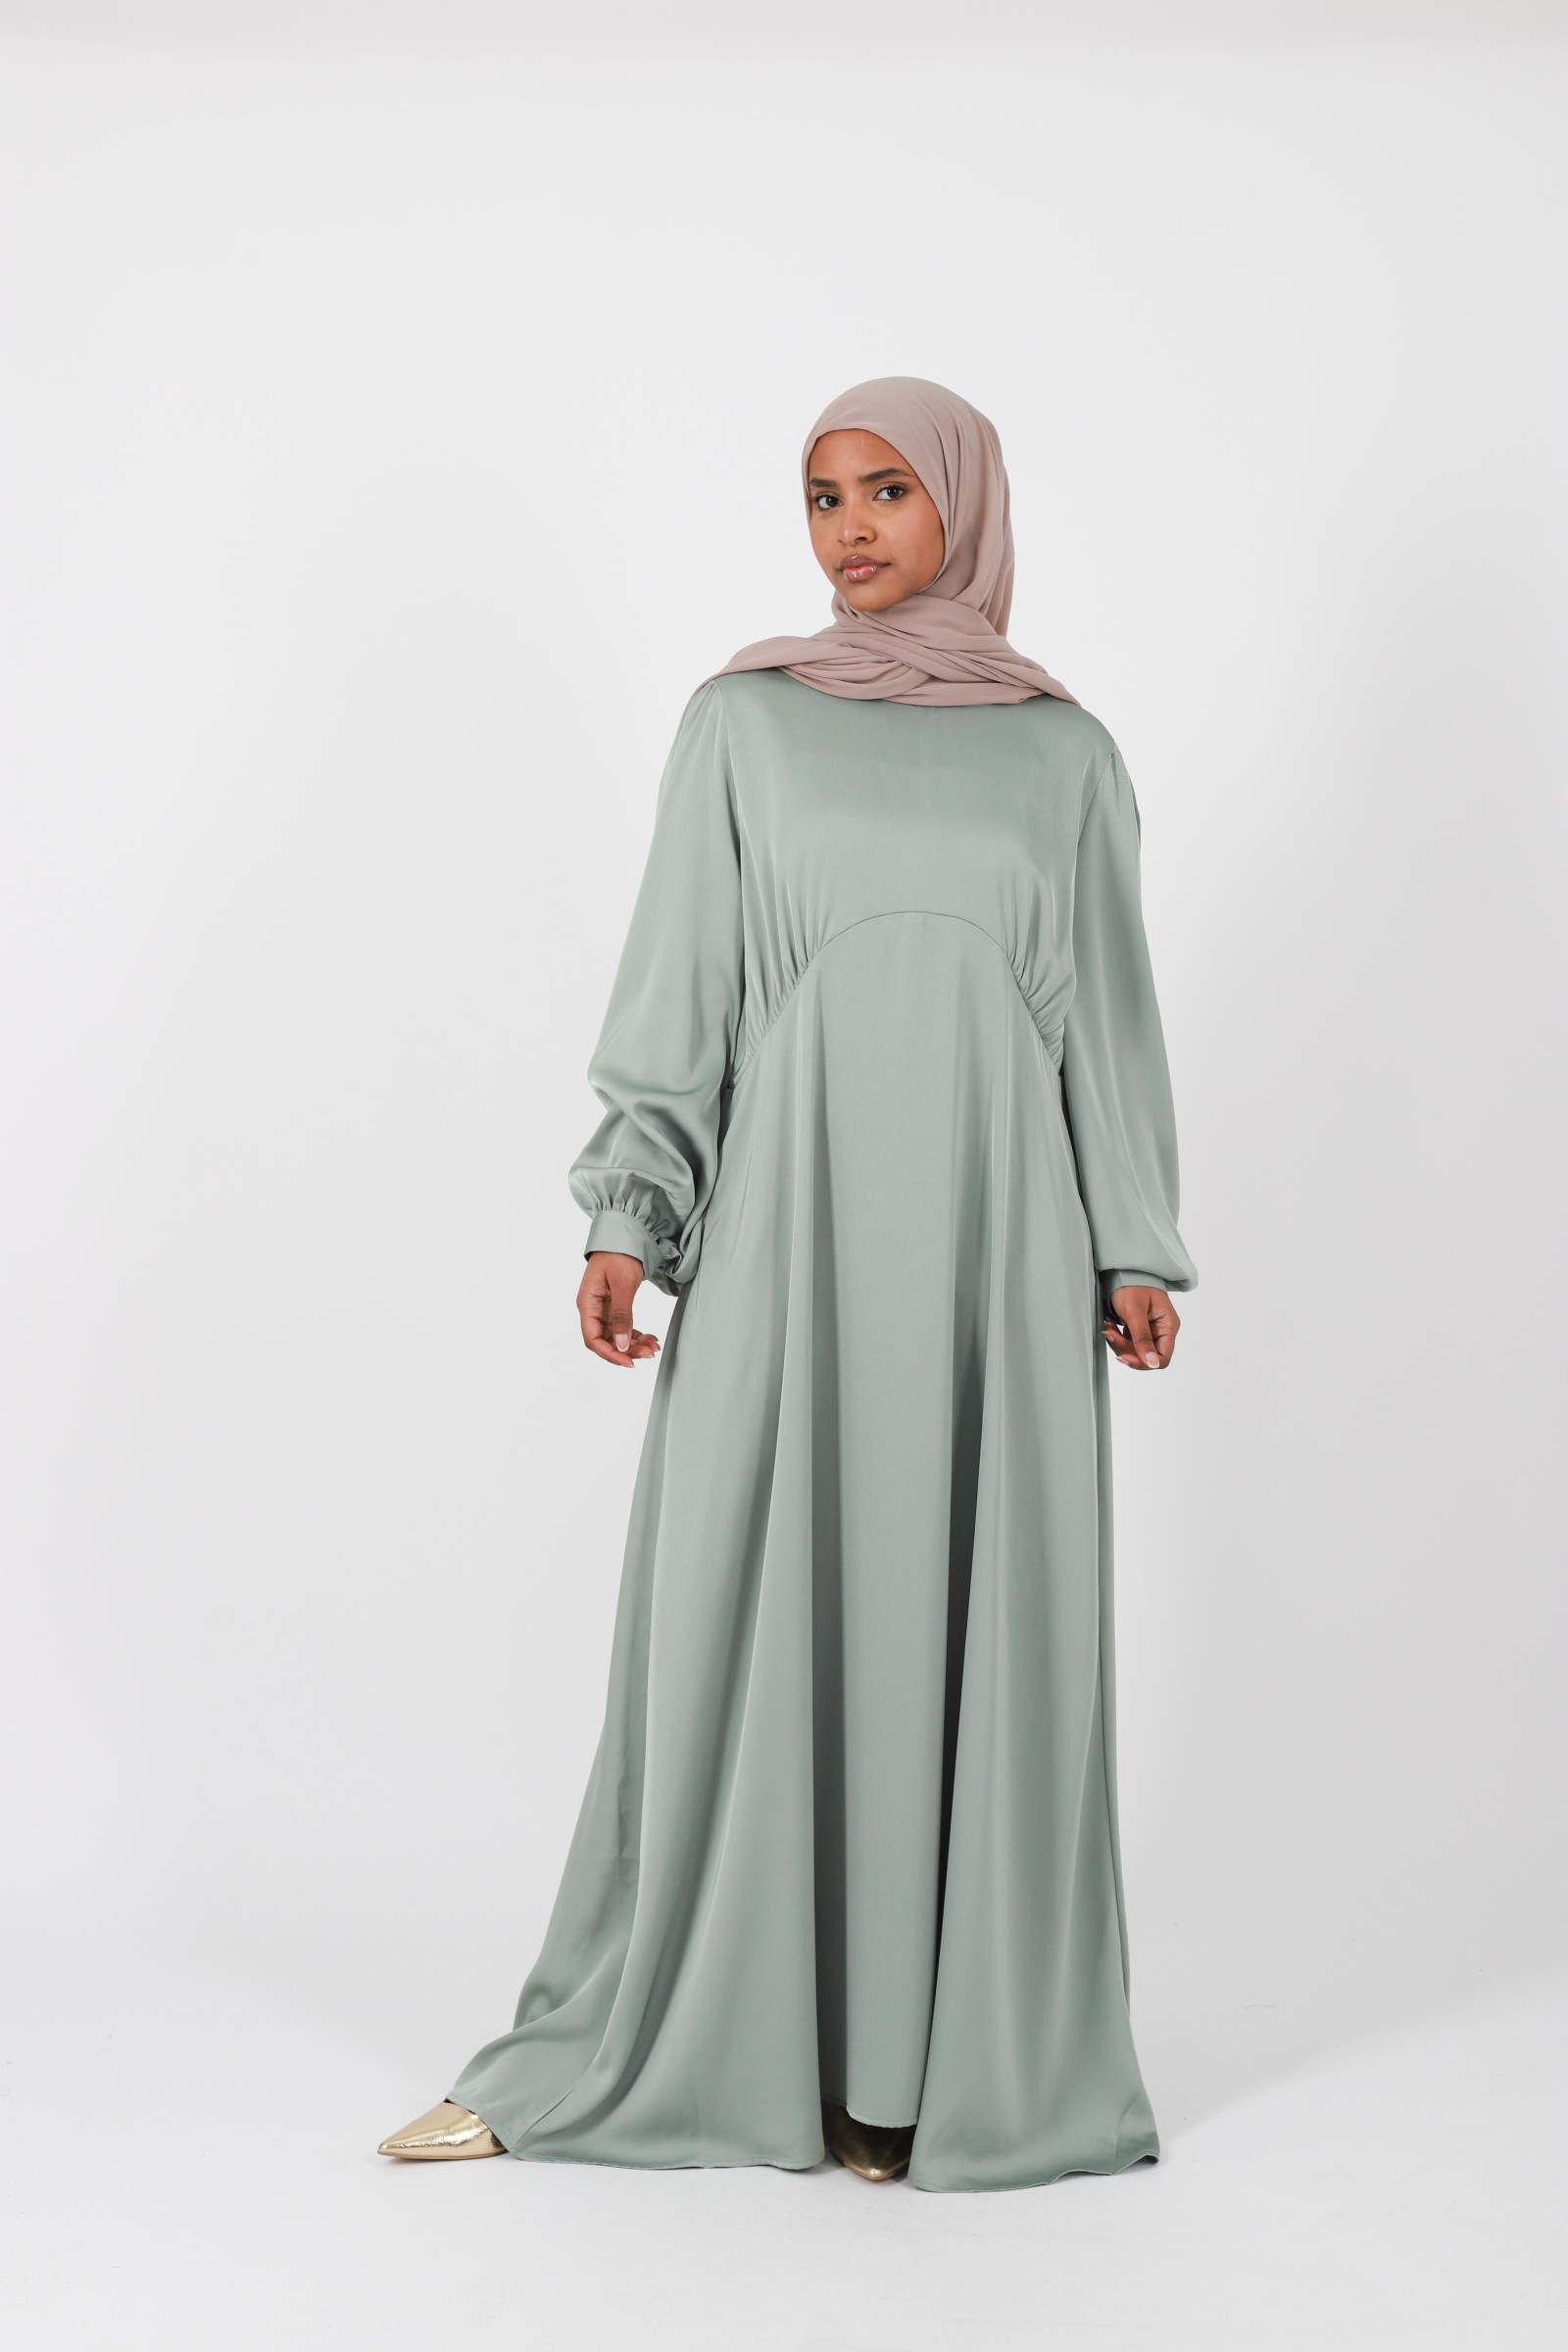 Party dress for chic and modest Muslim women